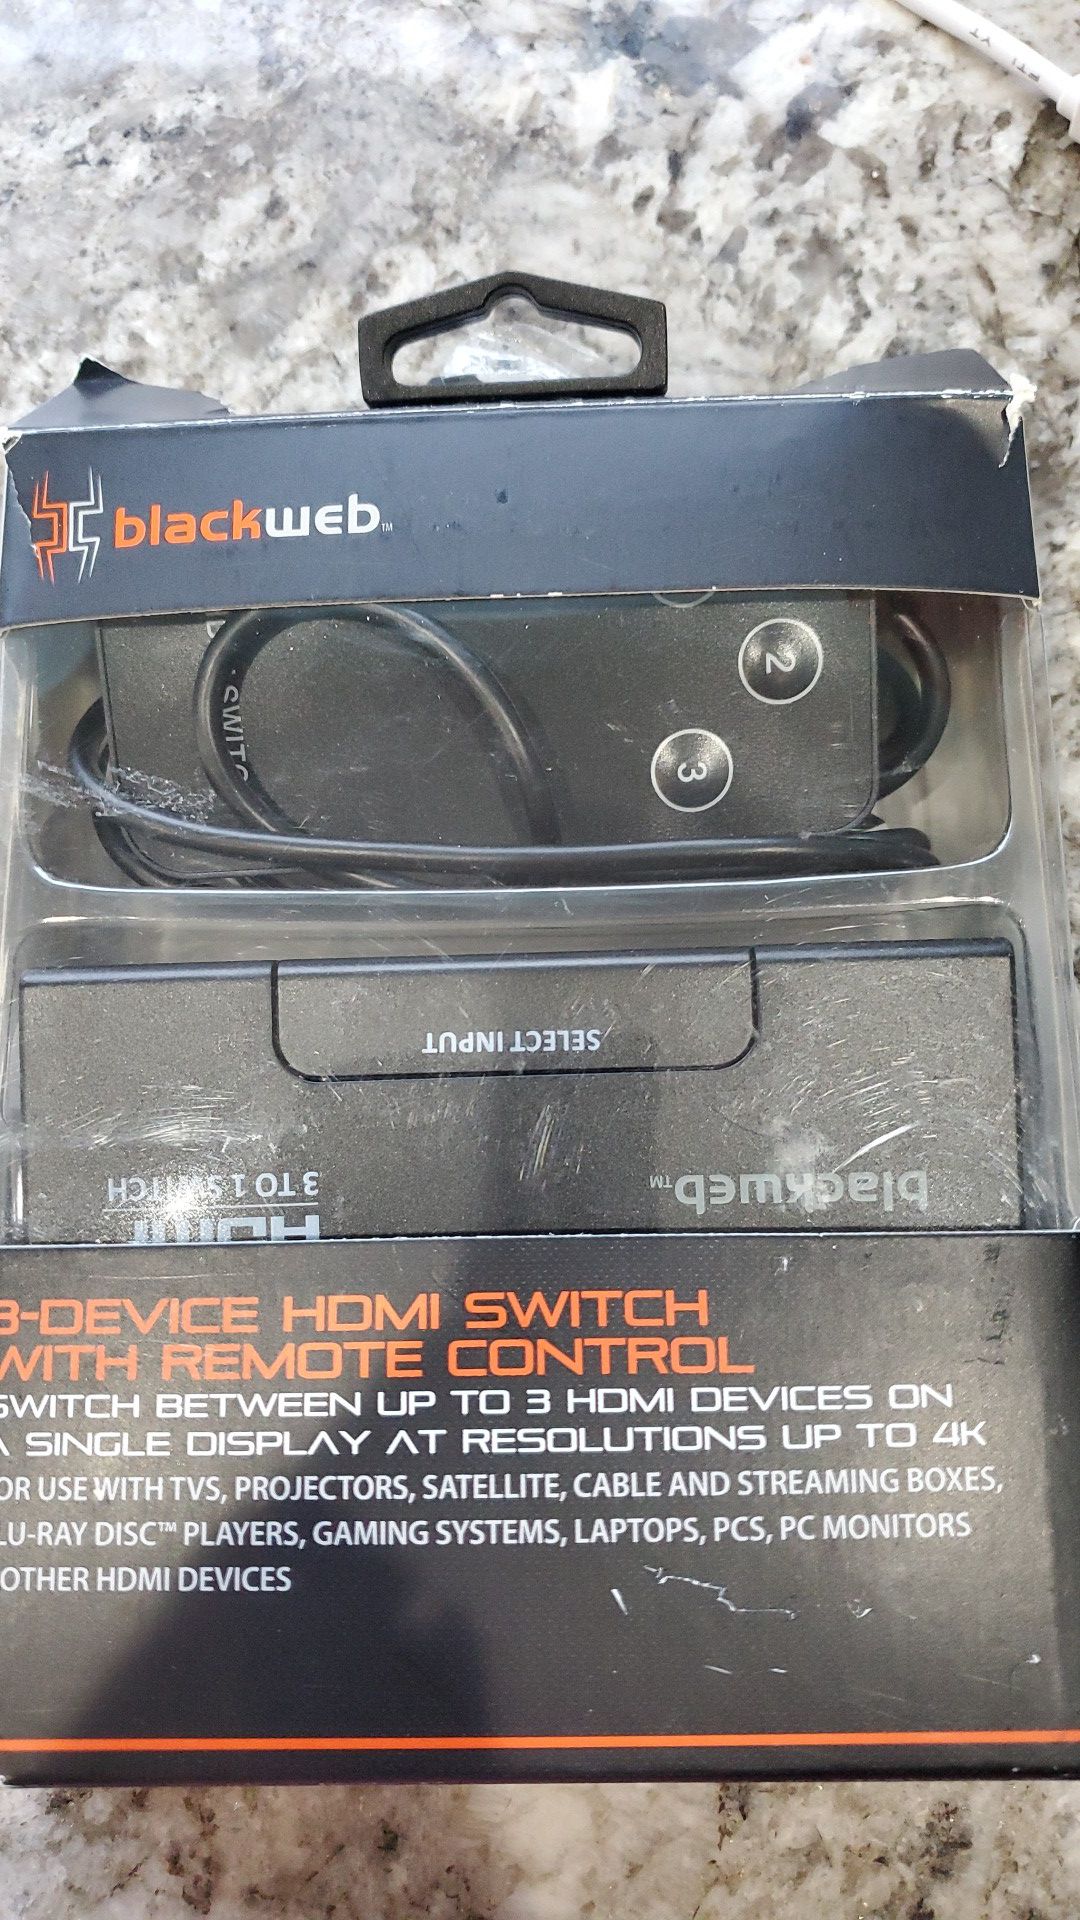 HDMI switch with remote control